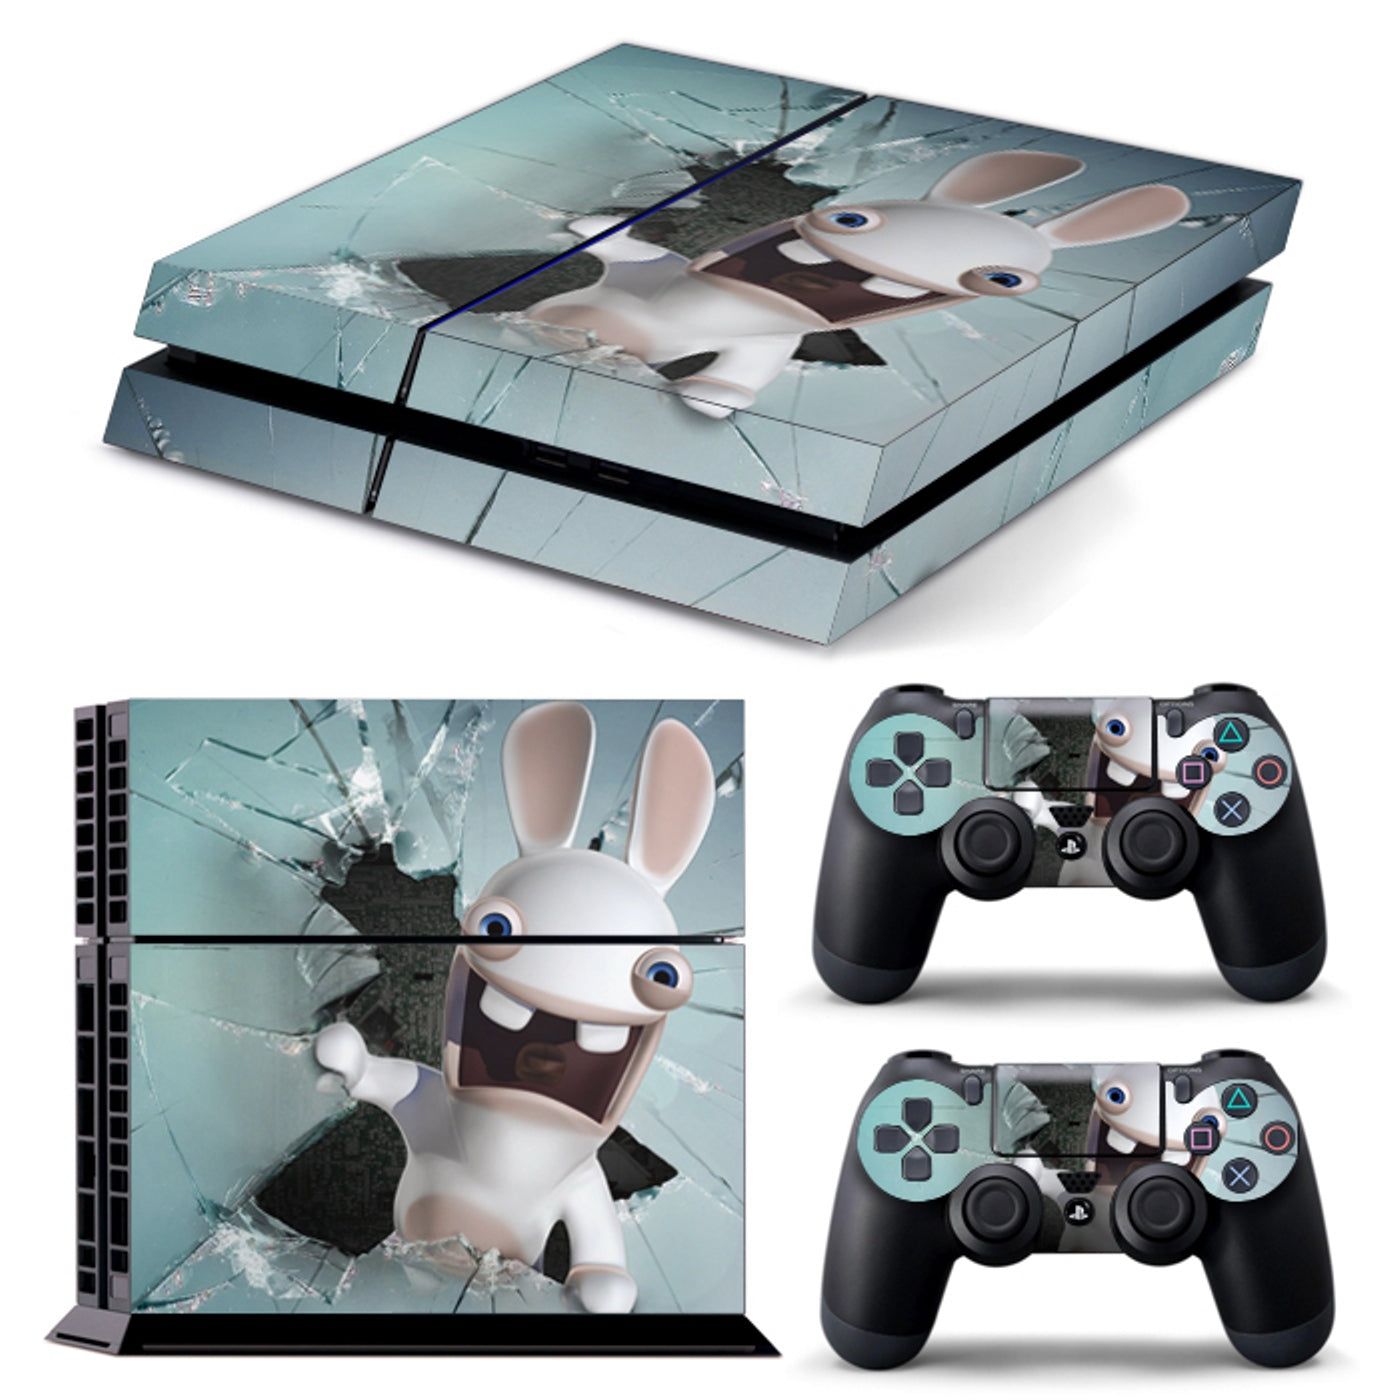 PS4 FULL BODY Accessory Wrap Sticker Skin Cover Decal for PS4 Playstation 4, ***White Rabbit***